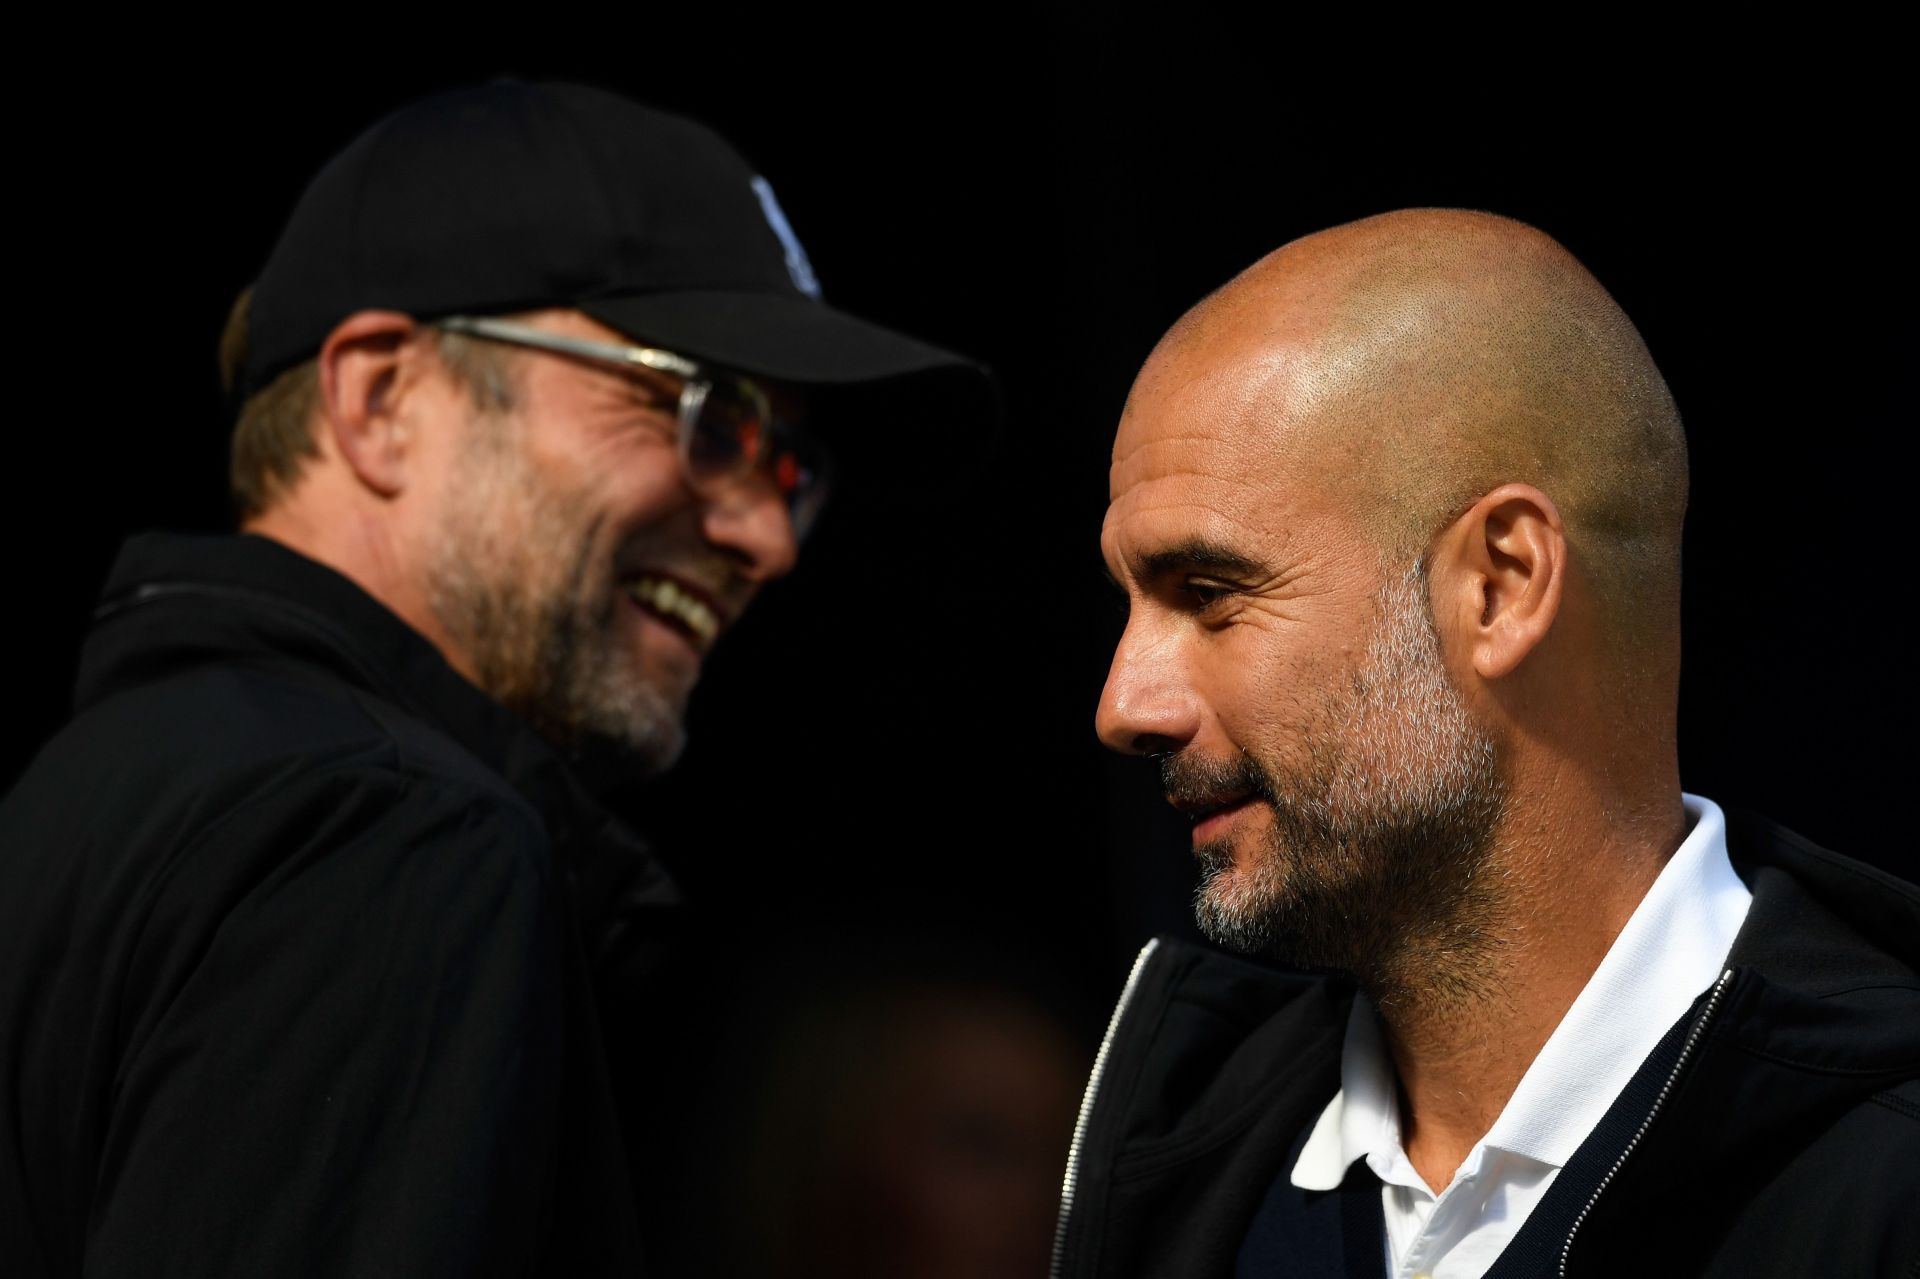 It promises to be a massive tactical battle between Jurgen Klopp and Pep Guardiola this weekend